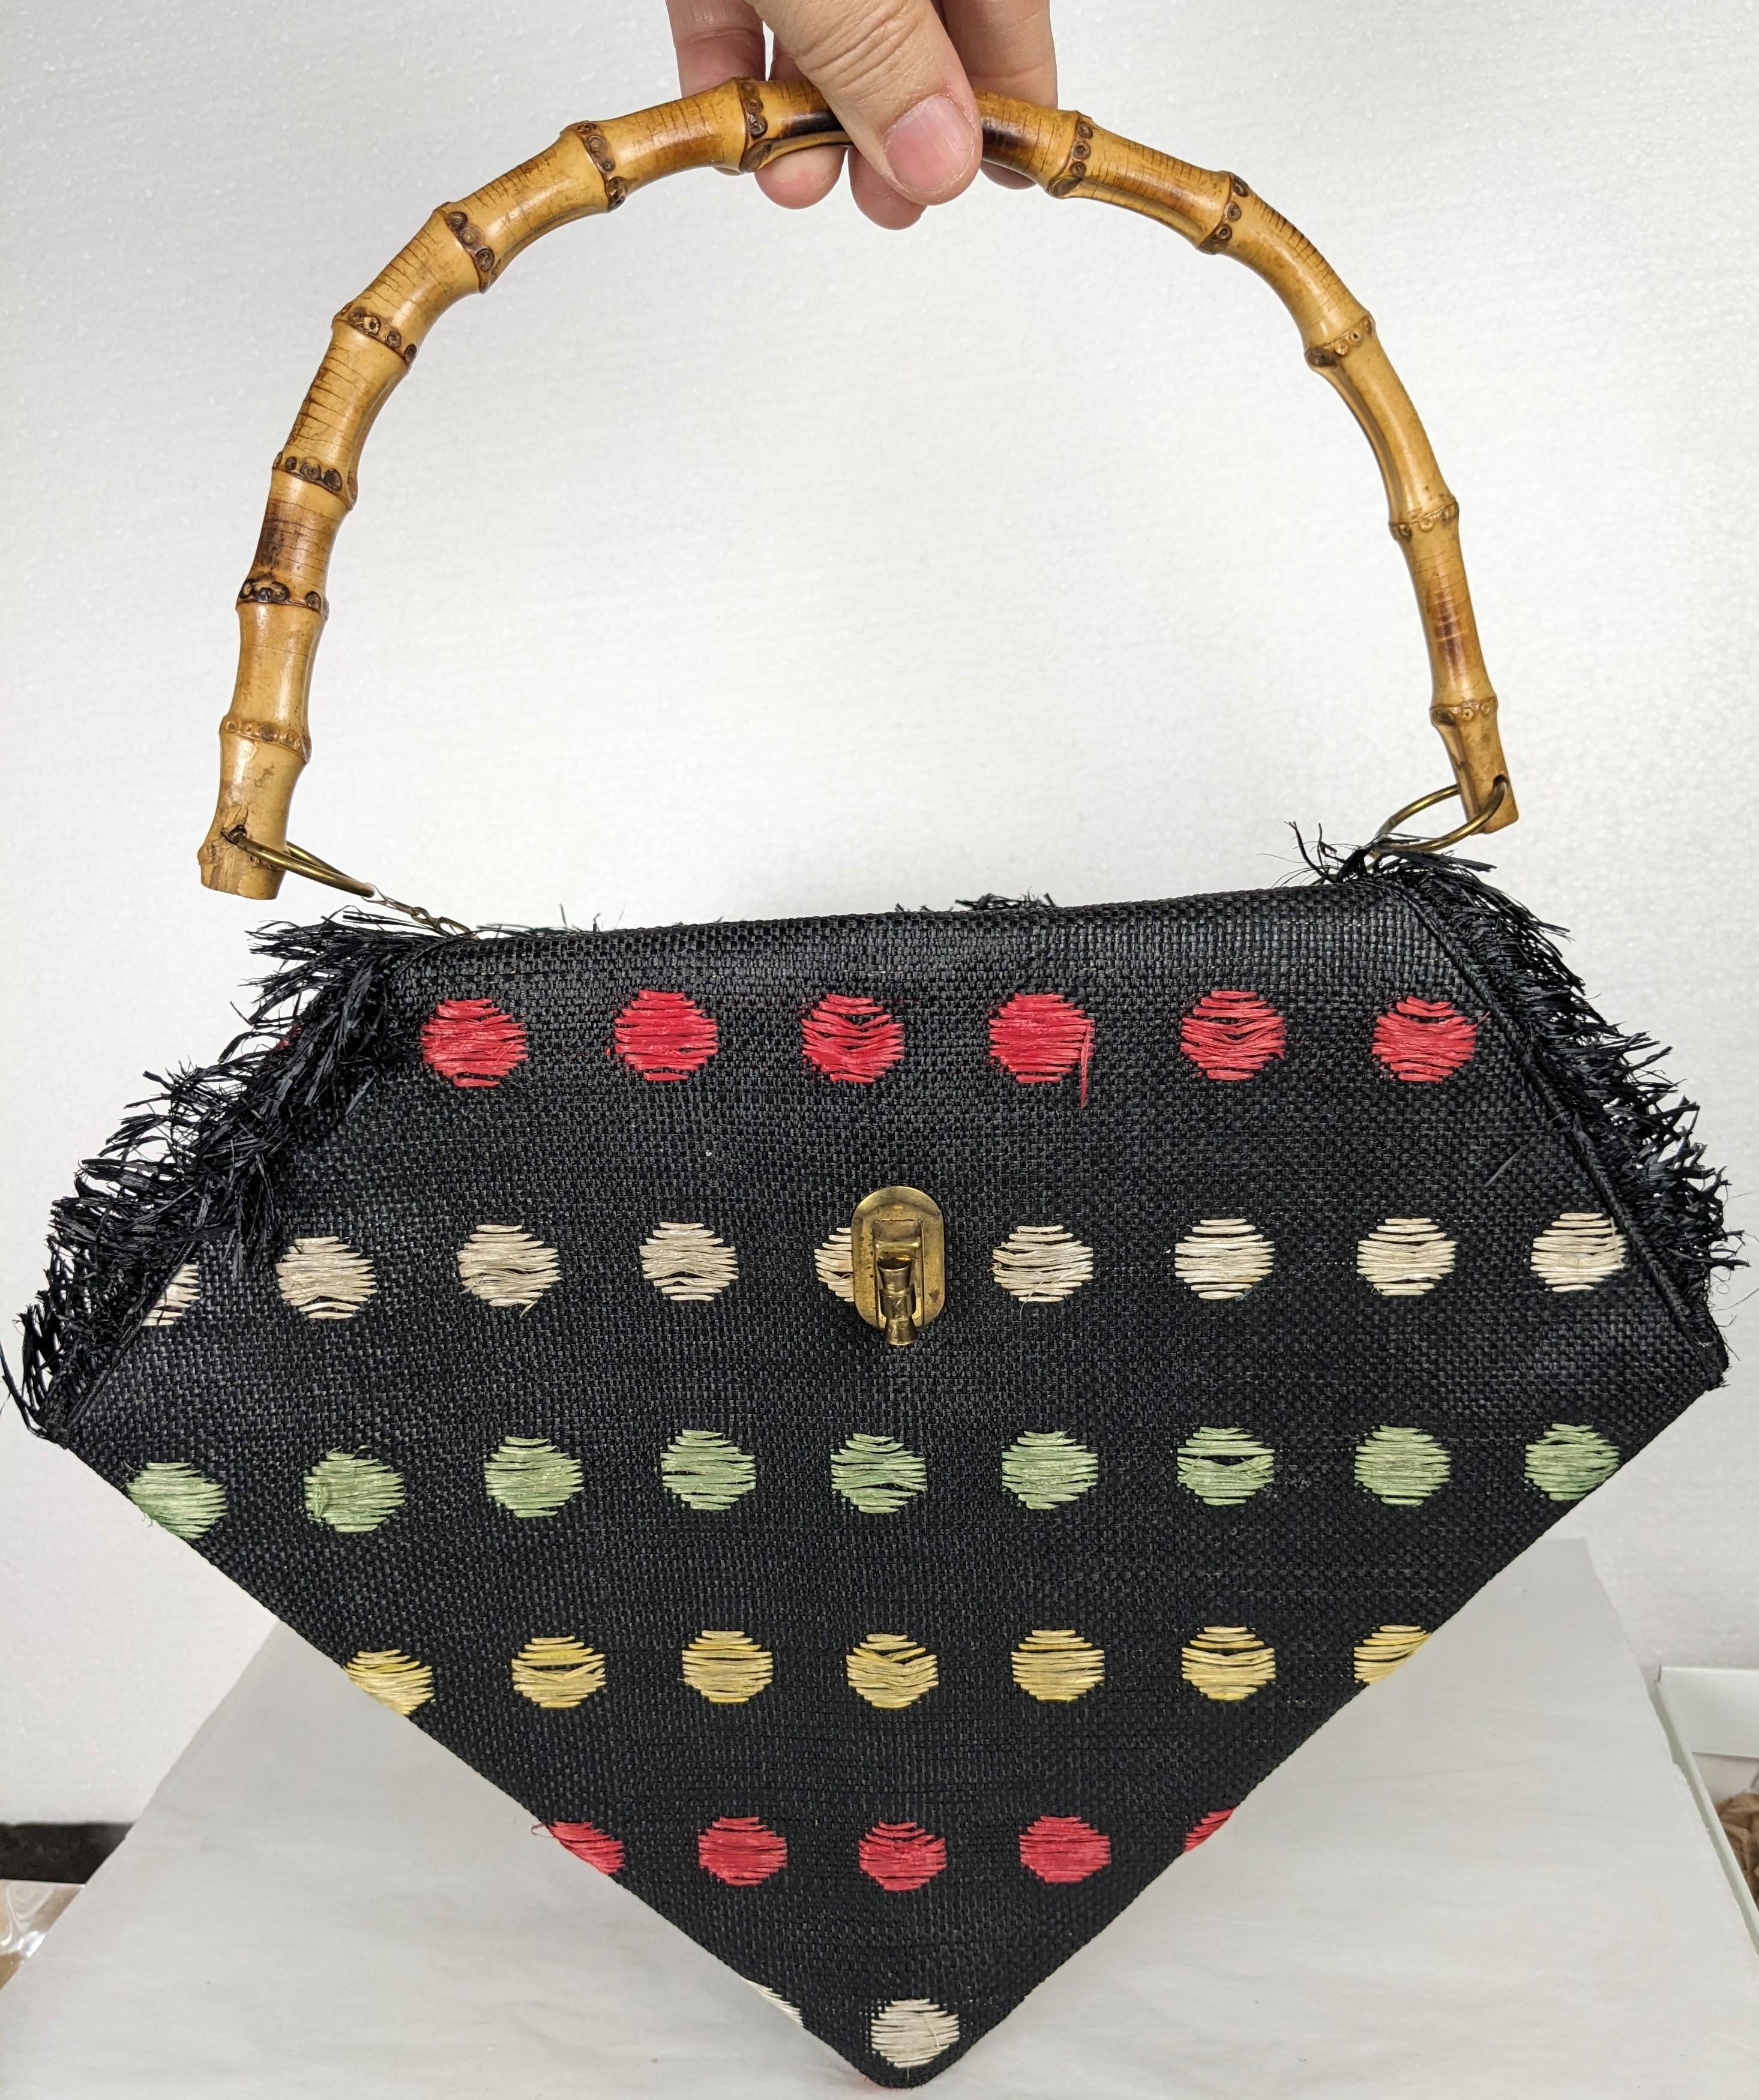 Super Unusual Italian Straw and Raffia Figural Bag from the 1950's. Designed in a triangular form, origami style with 2 compartments. Tiny chains suspended in the center hold the bamboo handle. Colorful woven patterns on the navy straw ground with